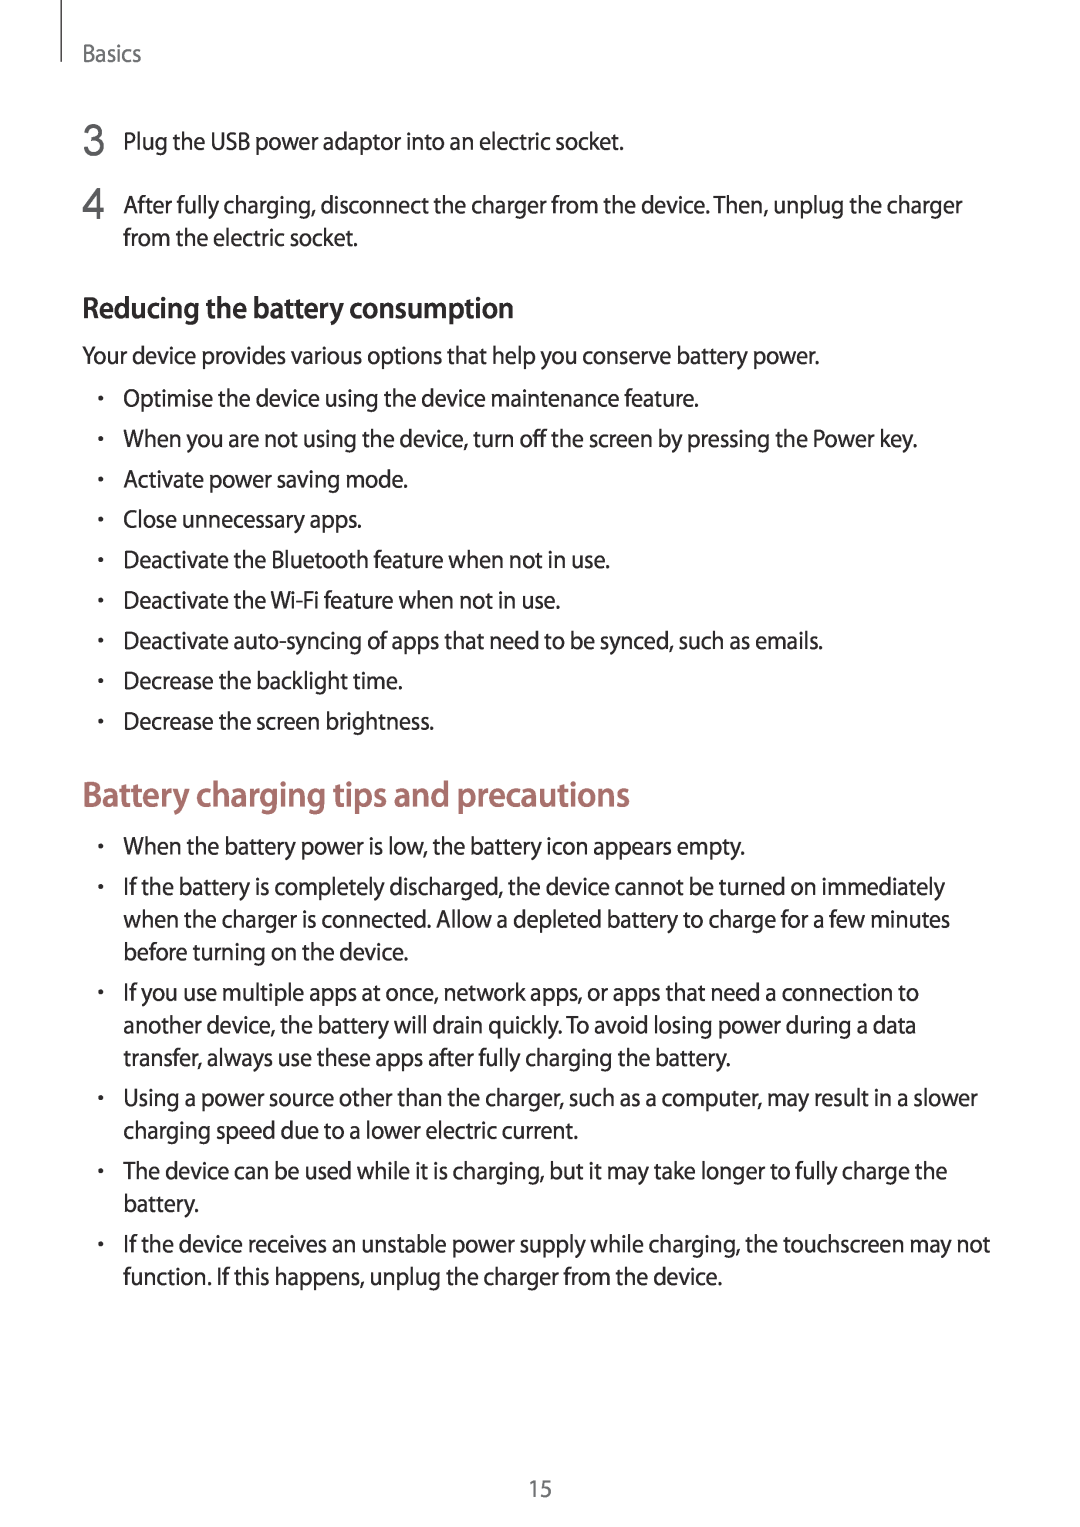 Samsung SM-A530FZVDITV, SM-A530FZDDXEF Battery charging tips and precautions, Reducing the battery consumption, Basics 